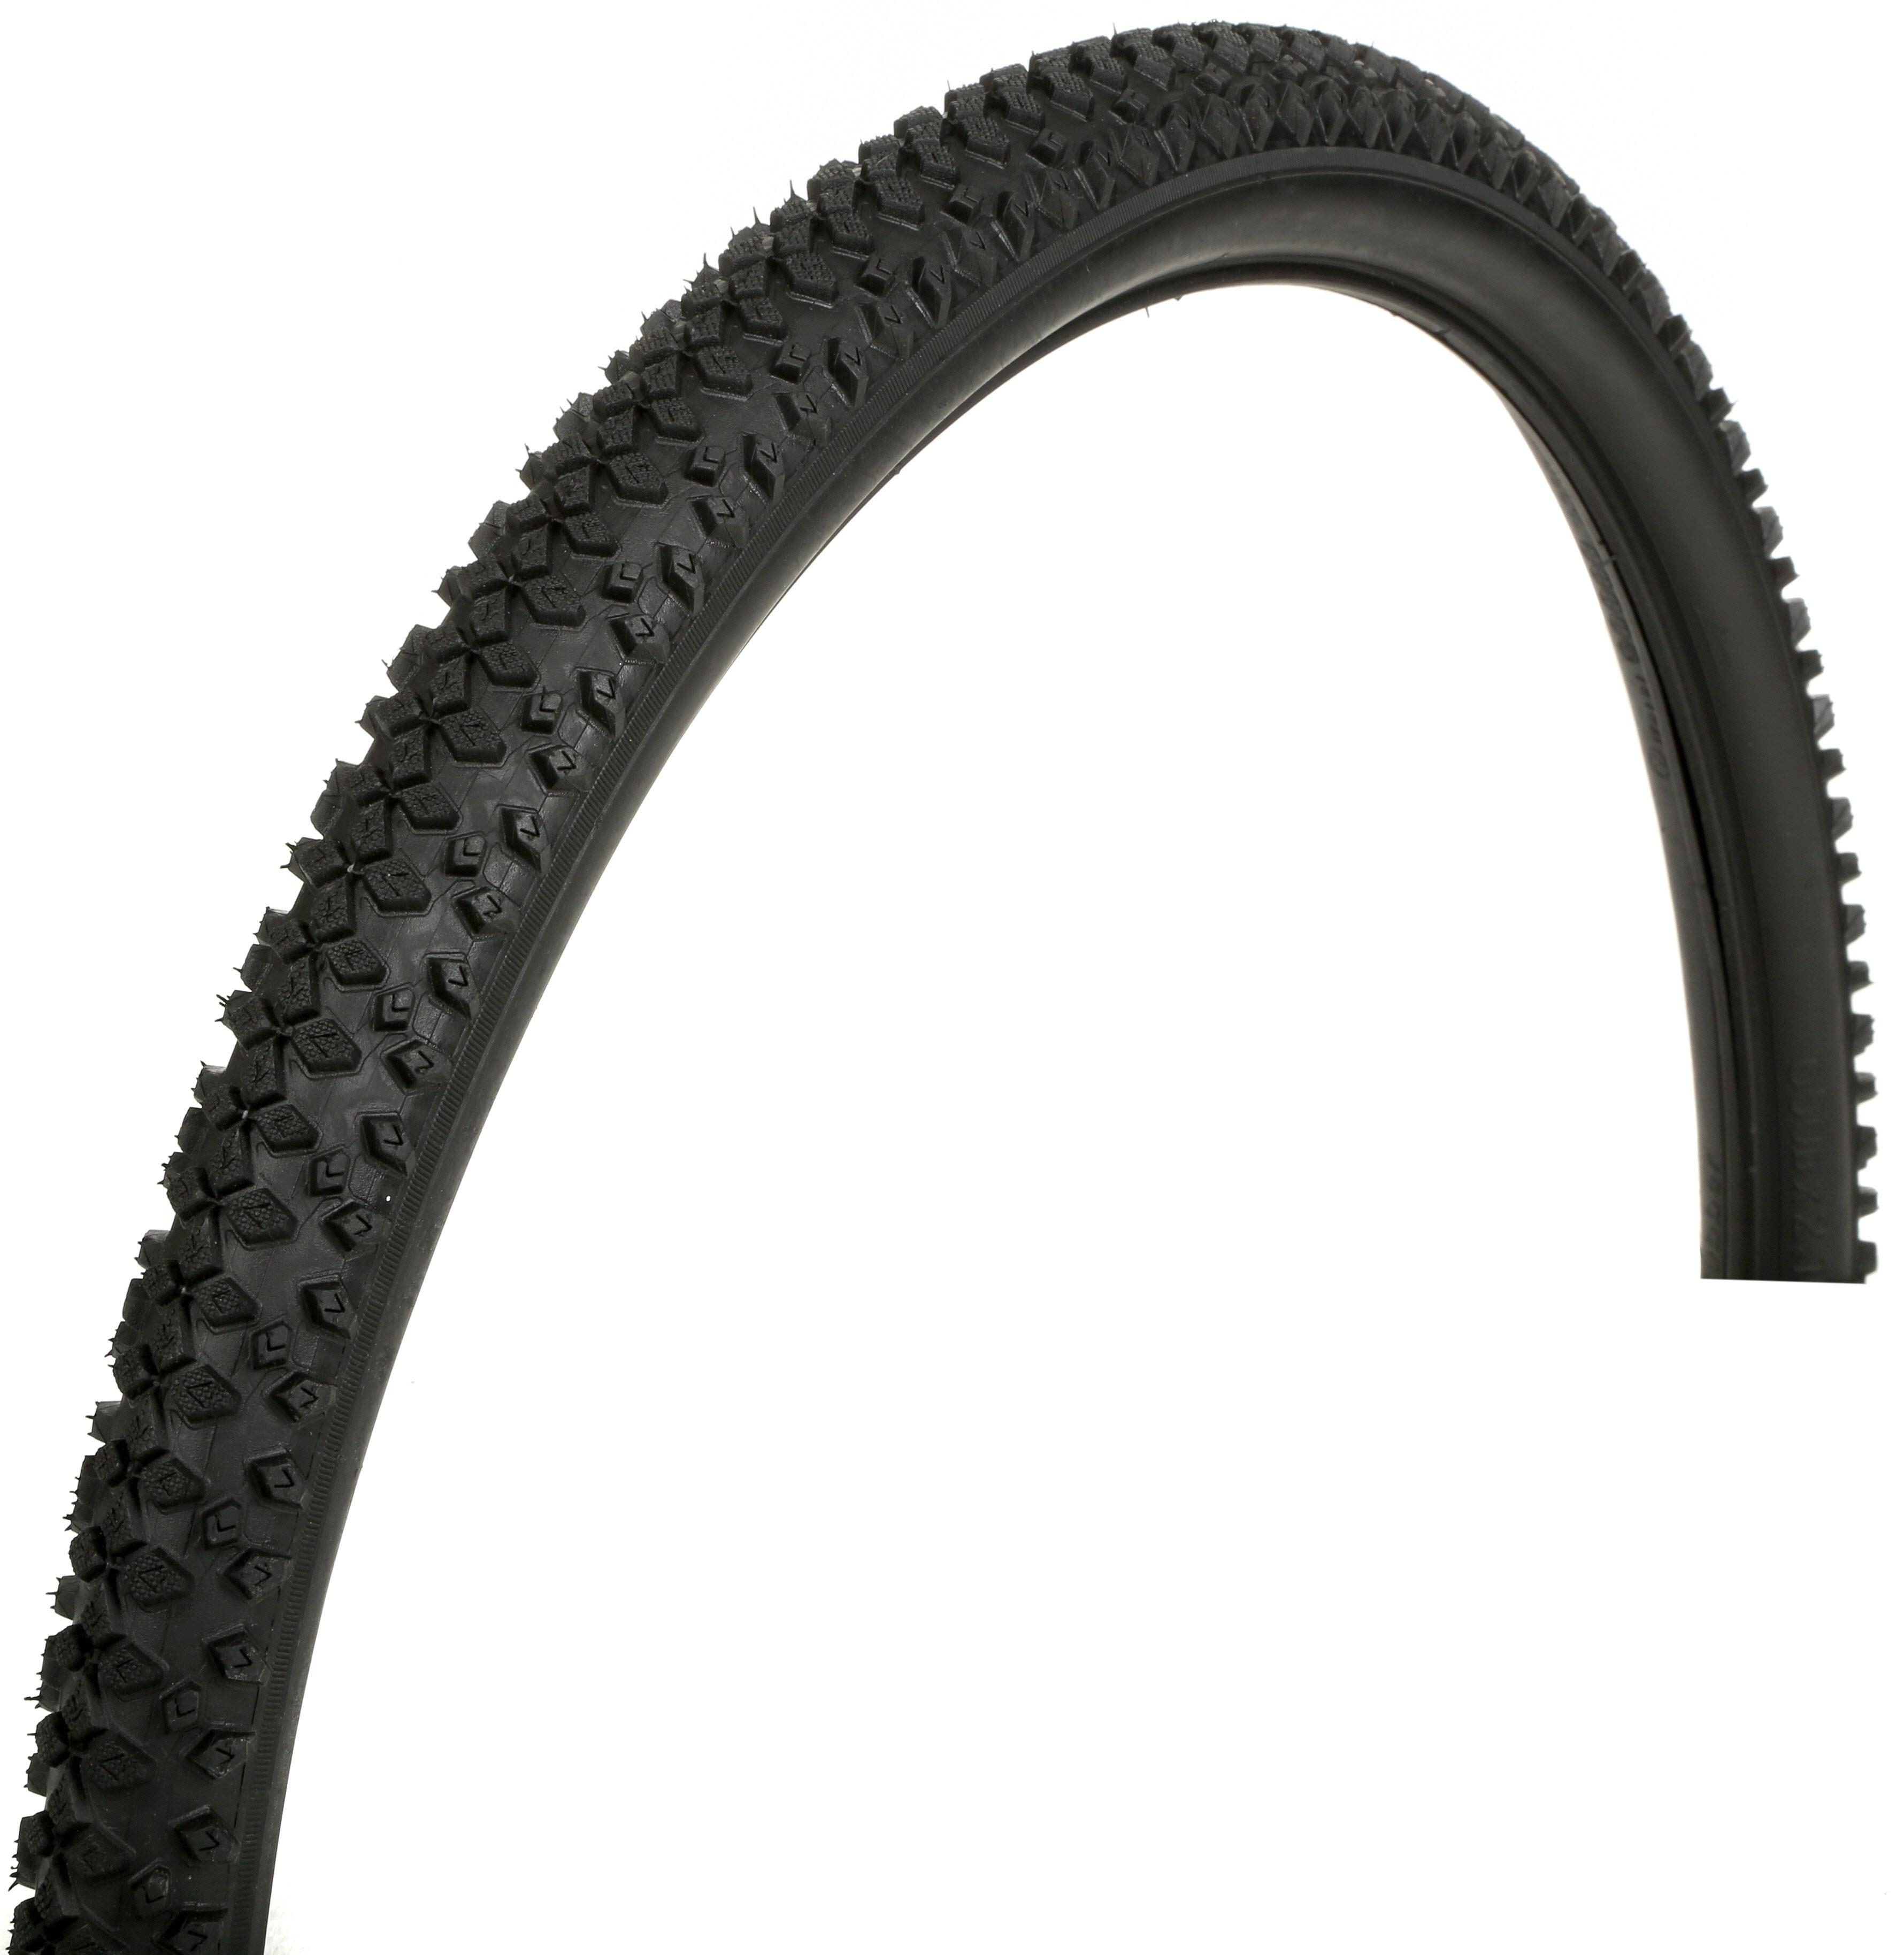 Bikehut Mtb Tyre 27.5 X 2.1 With Puncture Protect